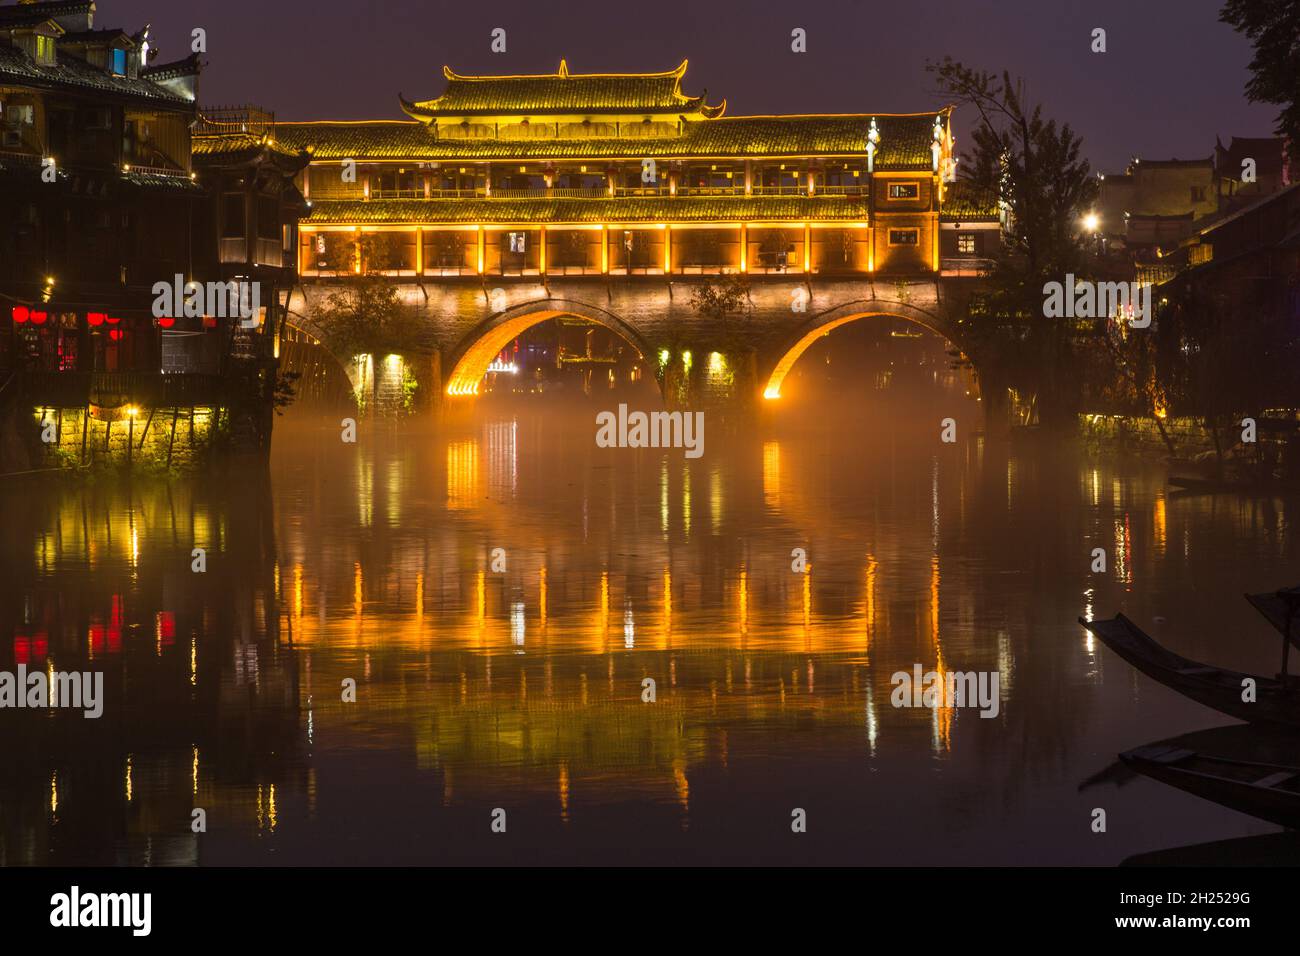 The Phoenix Hong or Hongqiao Bridge was built in the MIao style over the Tuojing River, Fenghuang, China. Stock Photo